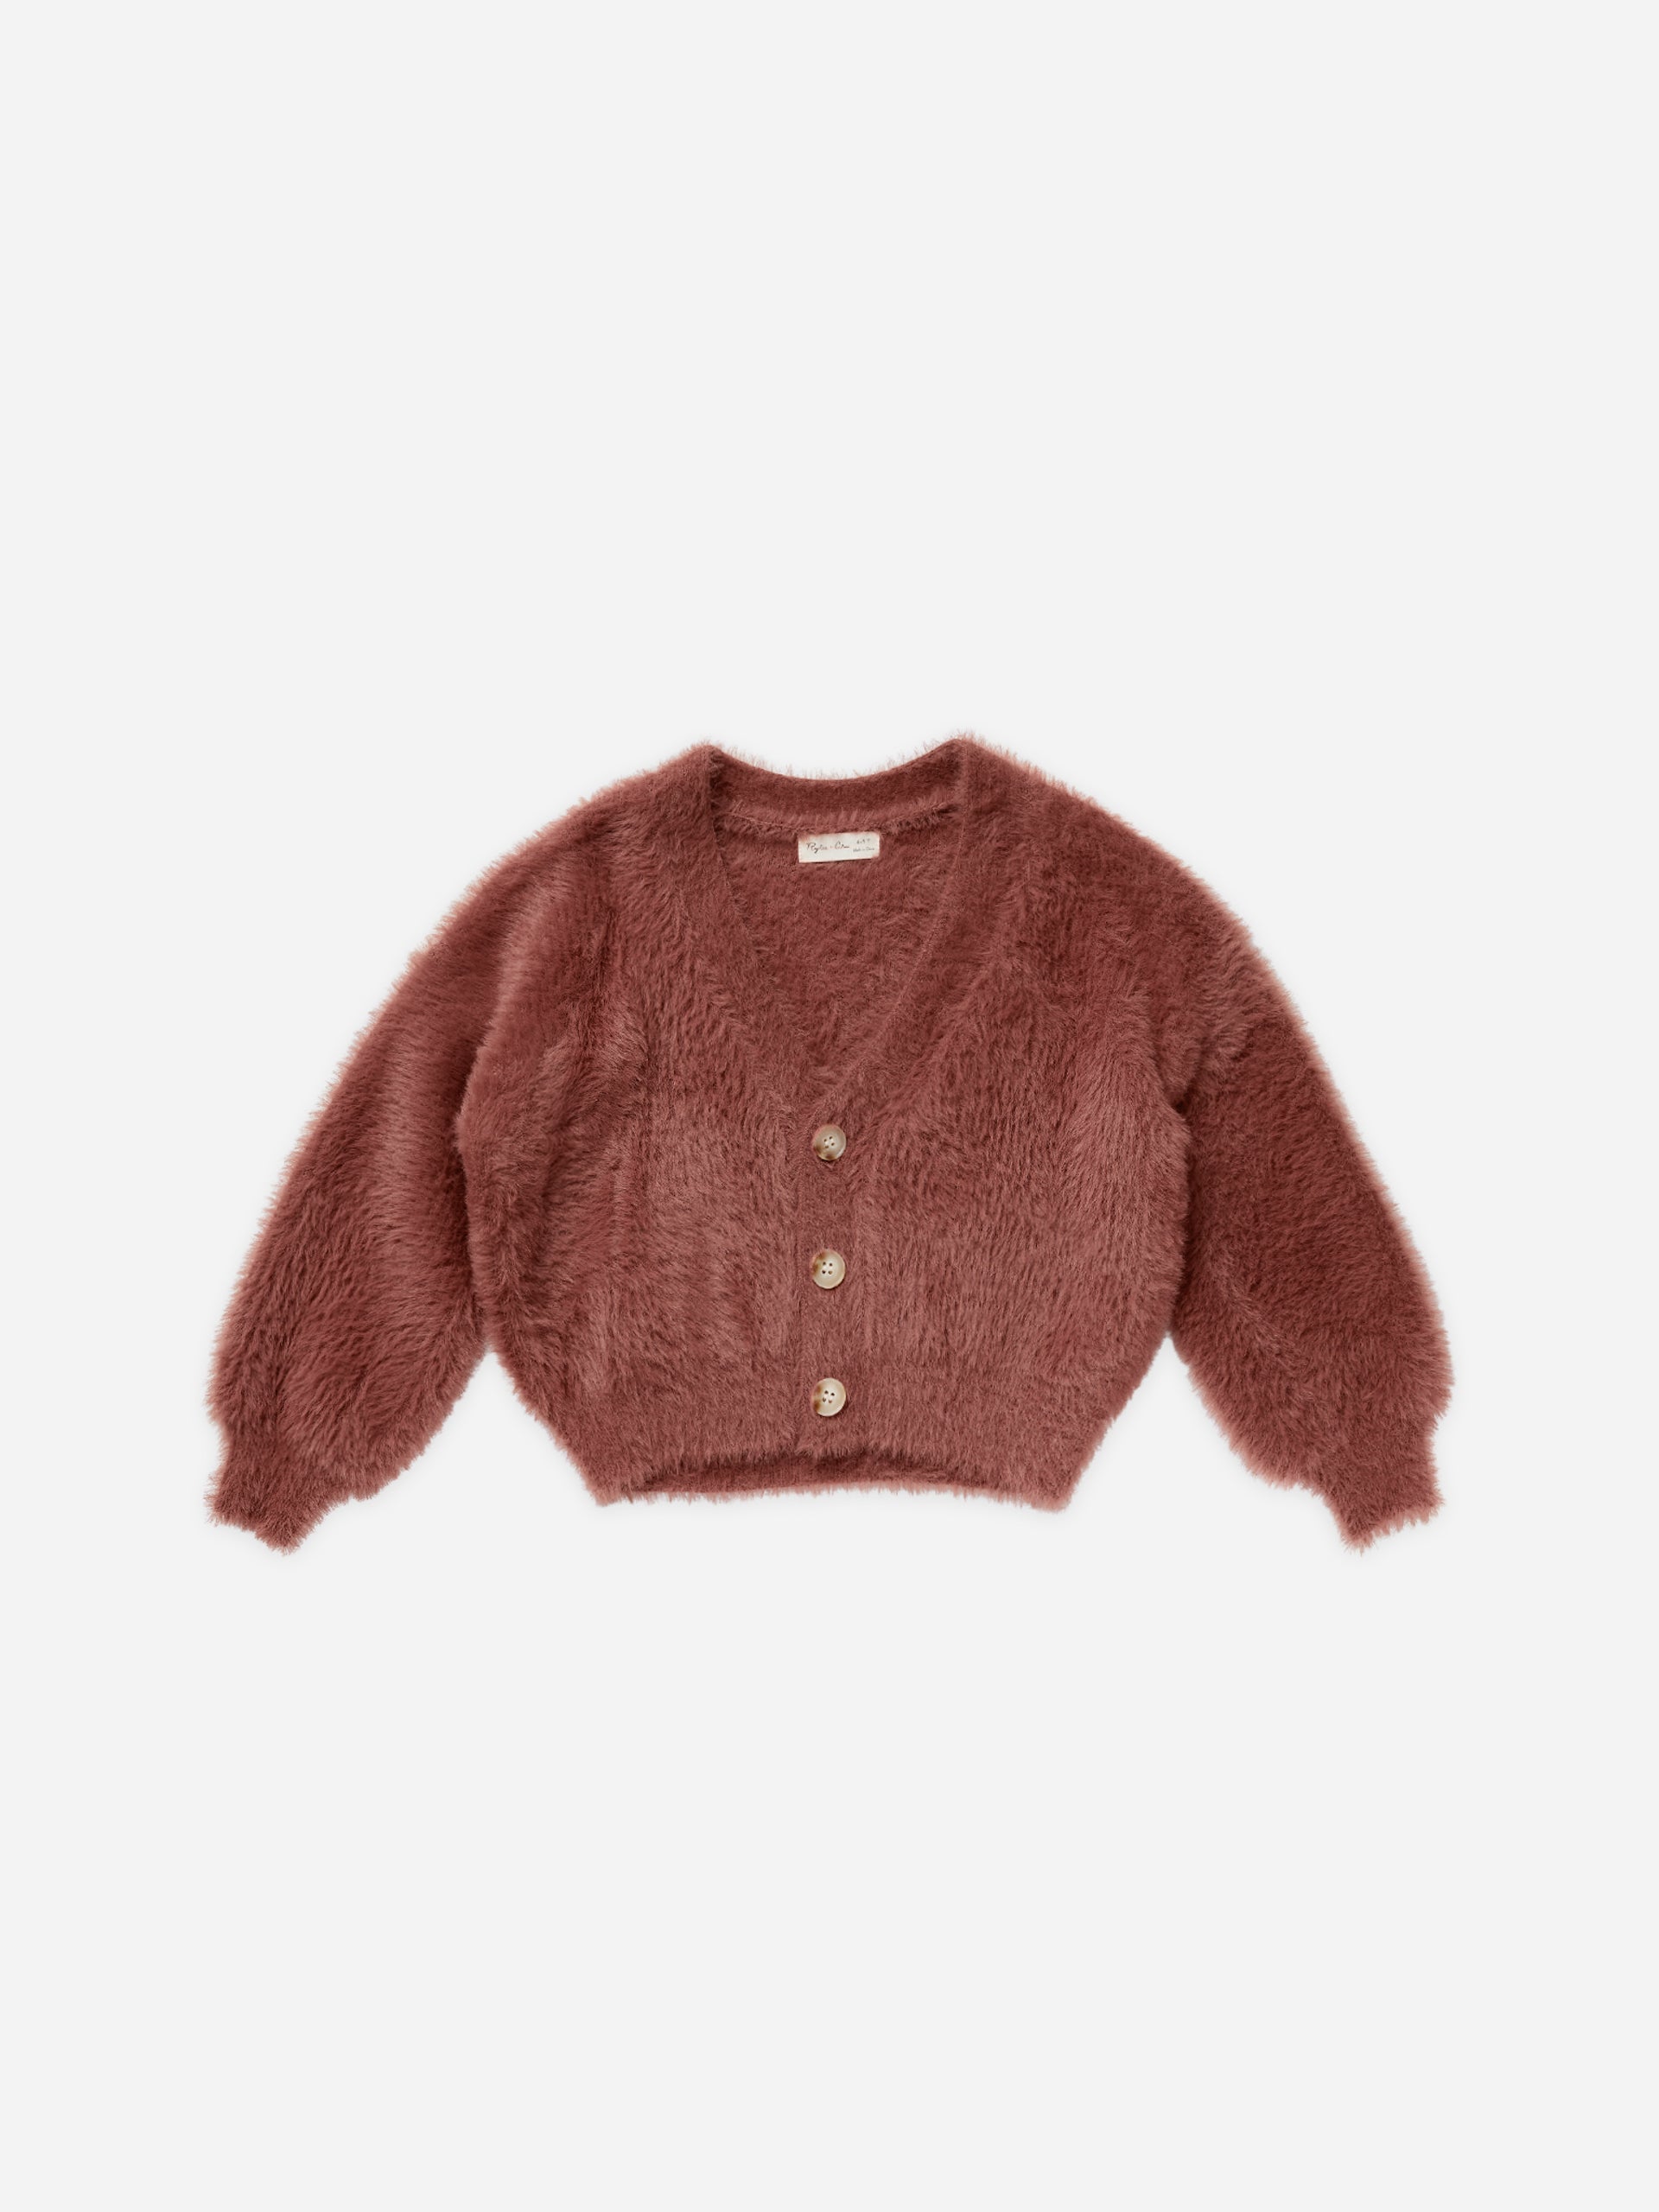 Boxy Crop Cardigan || Ruby - Rylee + Cru | Kids Clothes | Trendy Baby Clothes | Modern Infant Outfits |